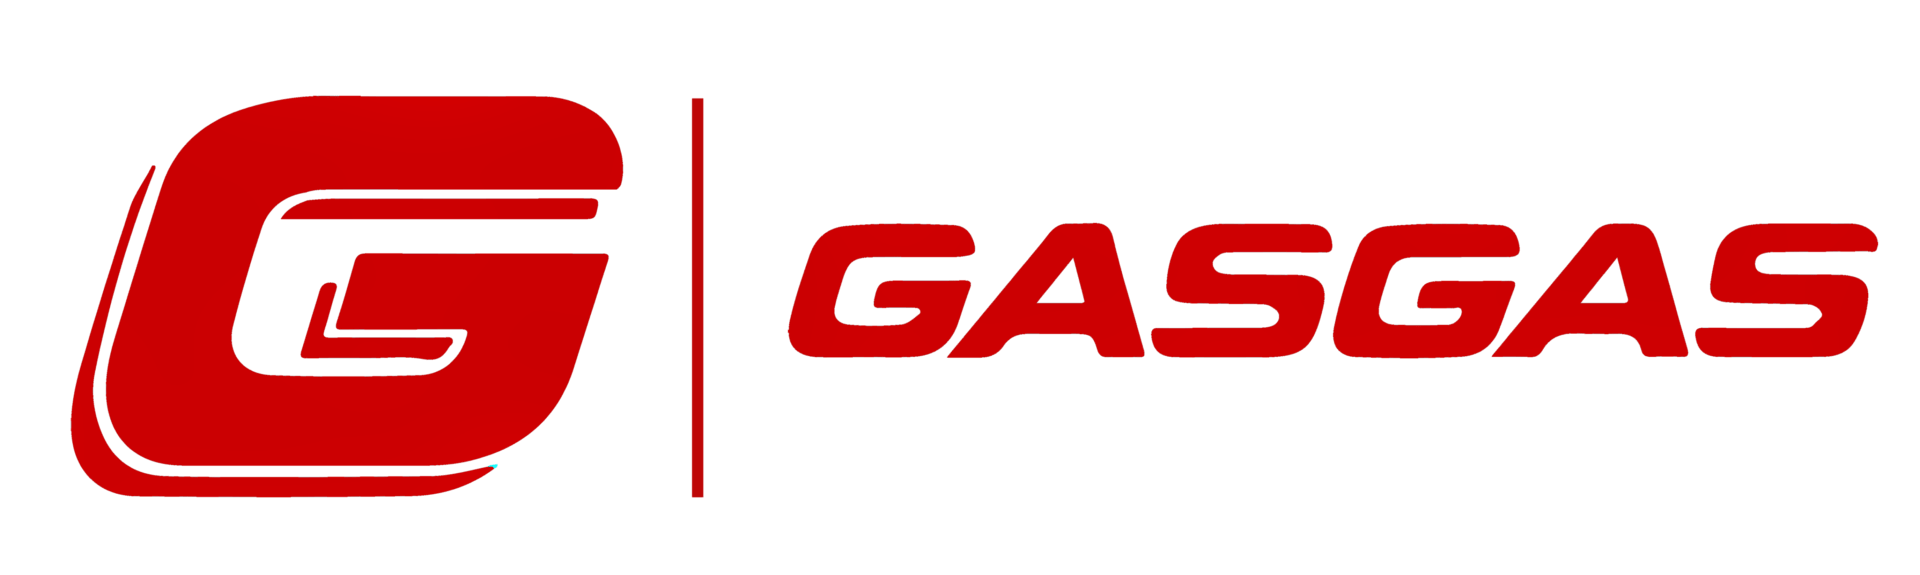 Gas Gas motorcycles logo png